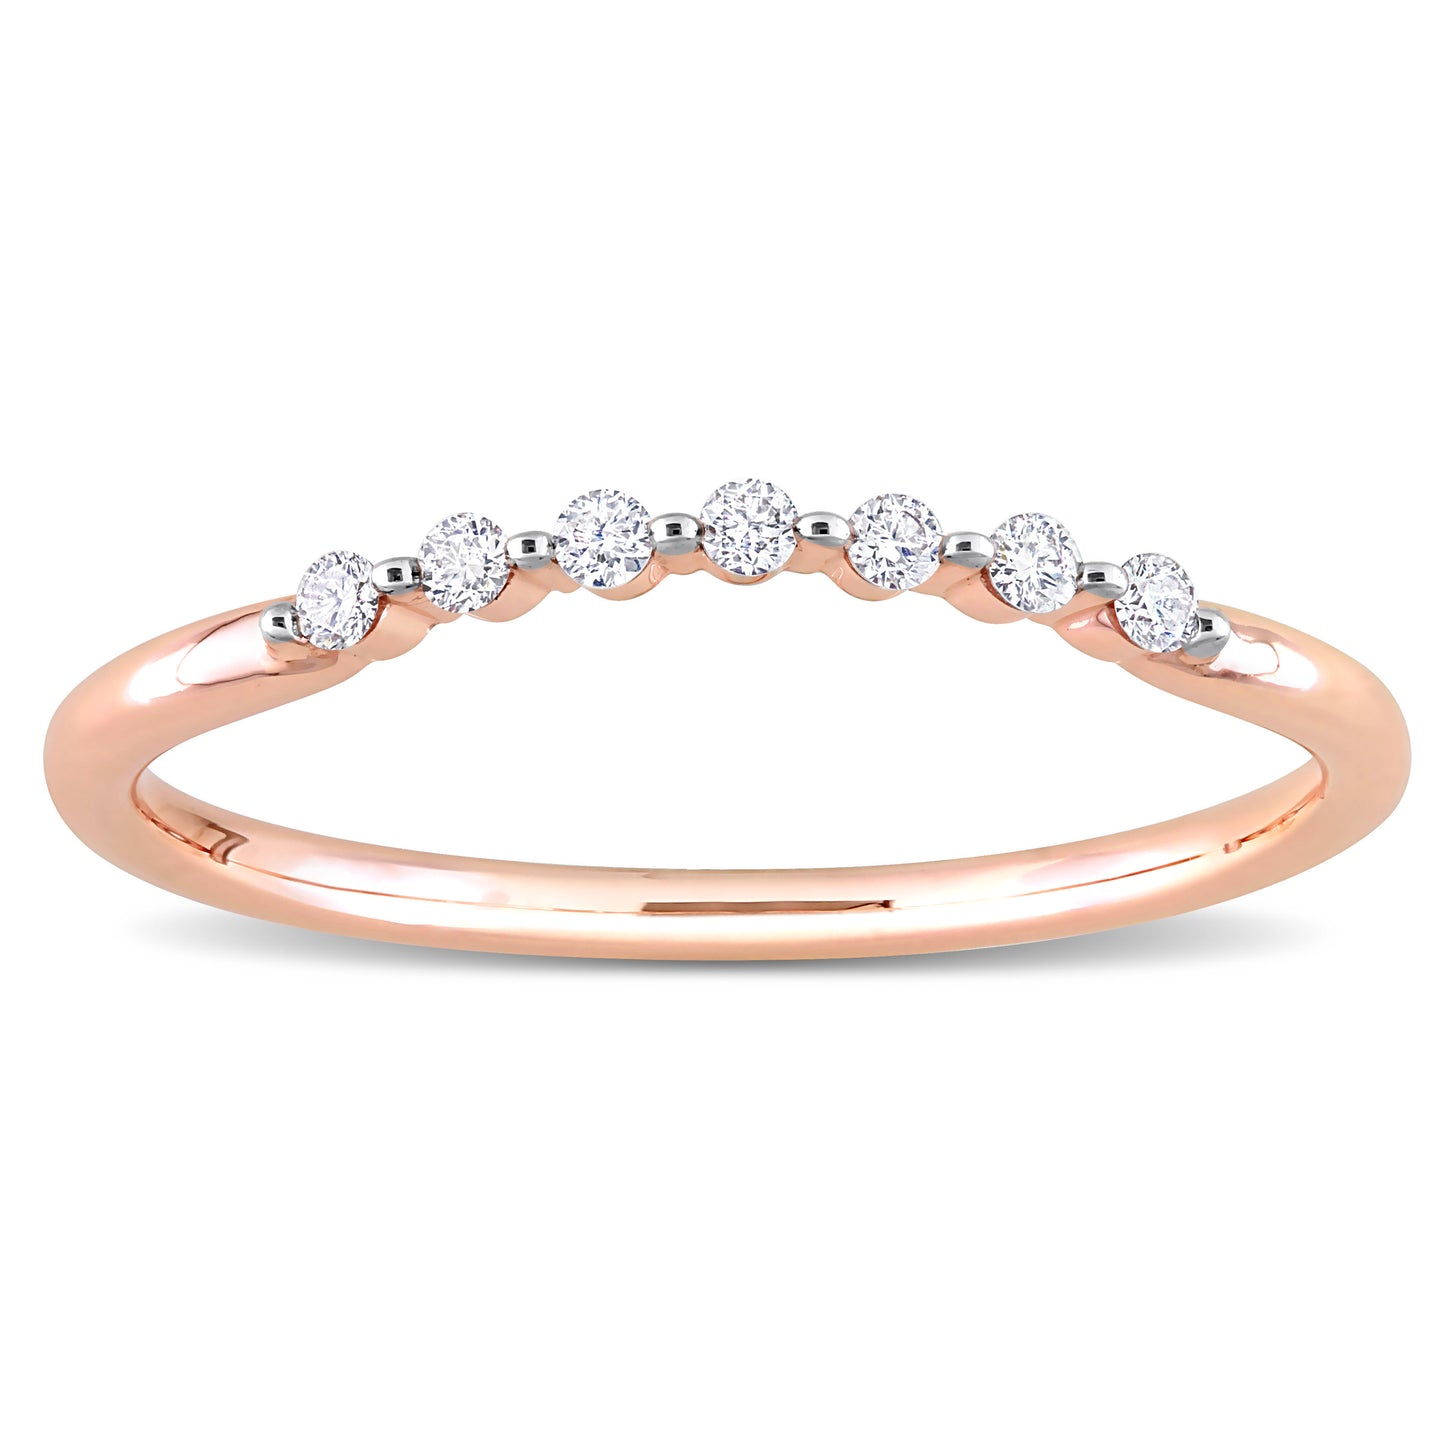 7-Stone Curved Diamond Ring in 14k Rose Gold